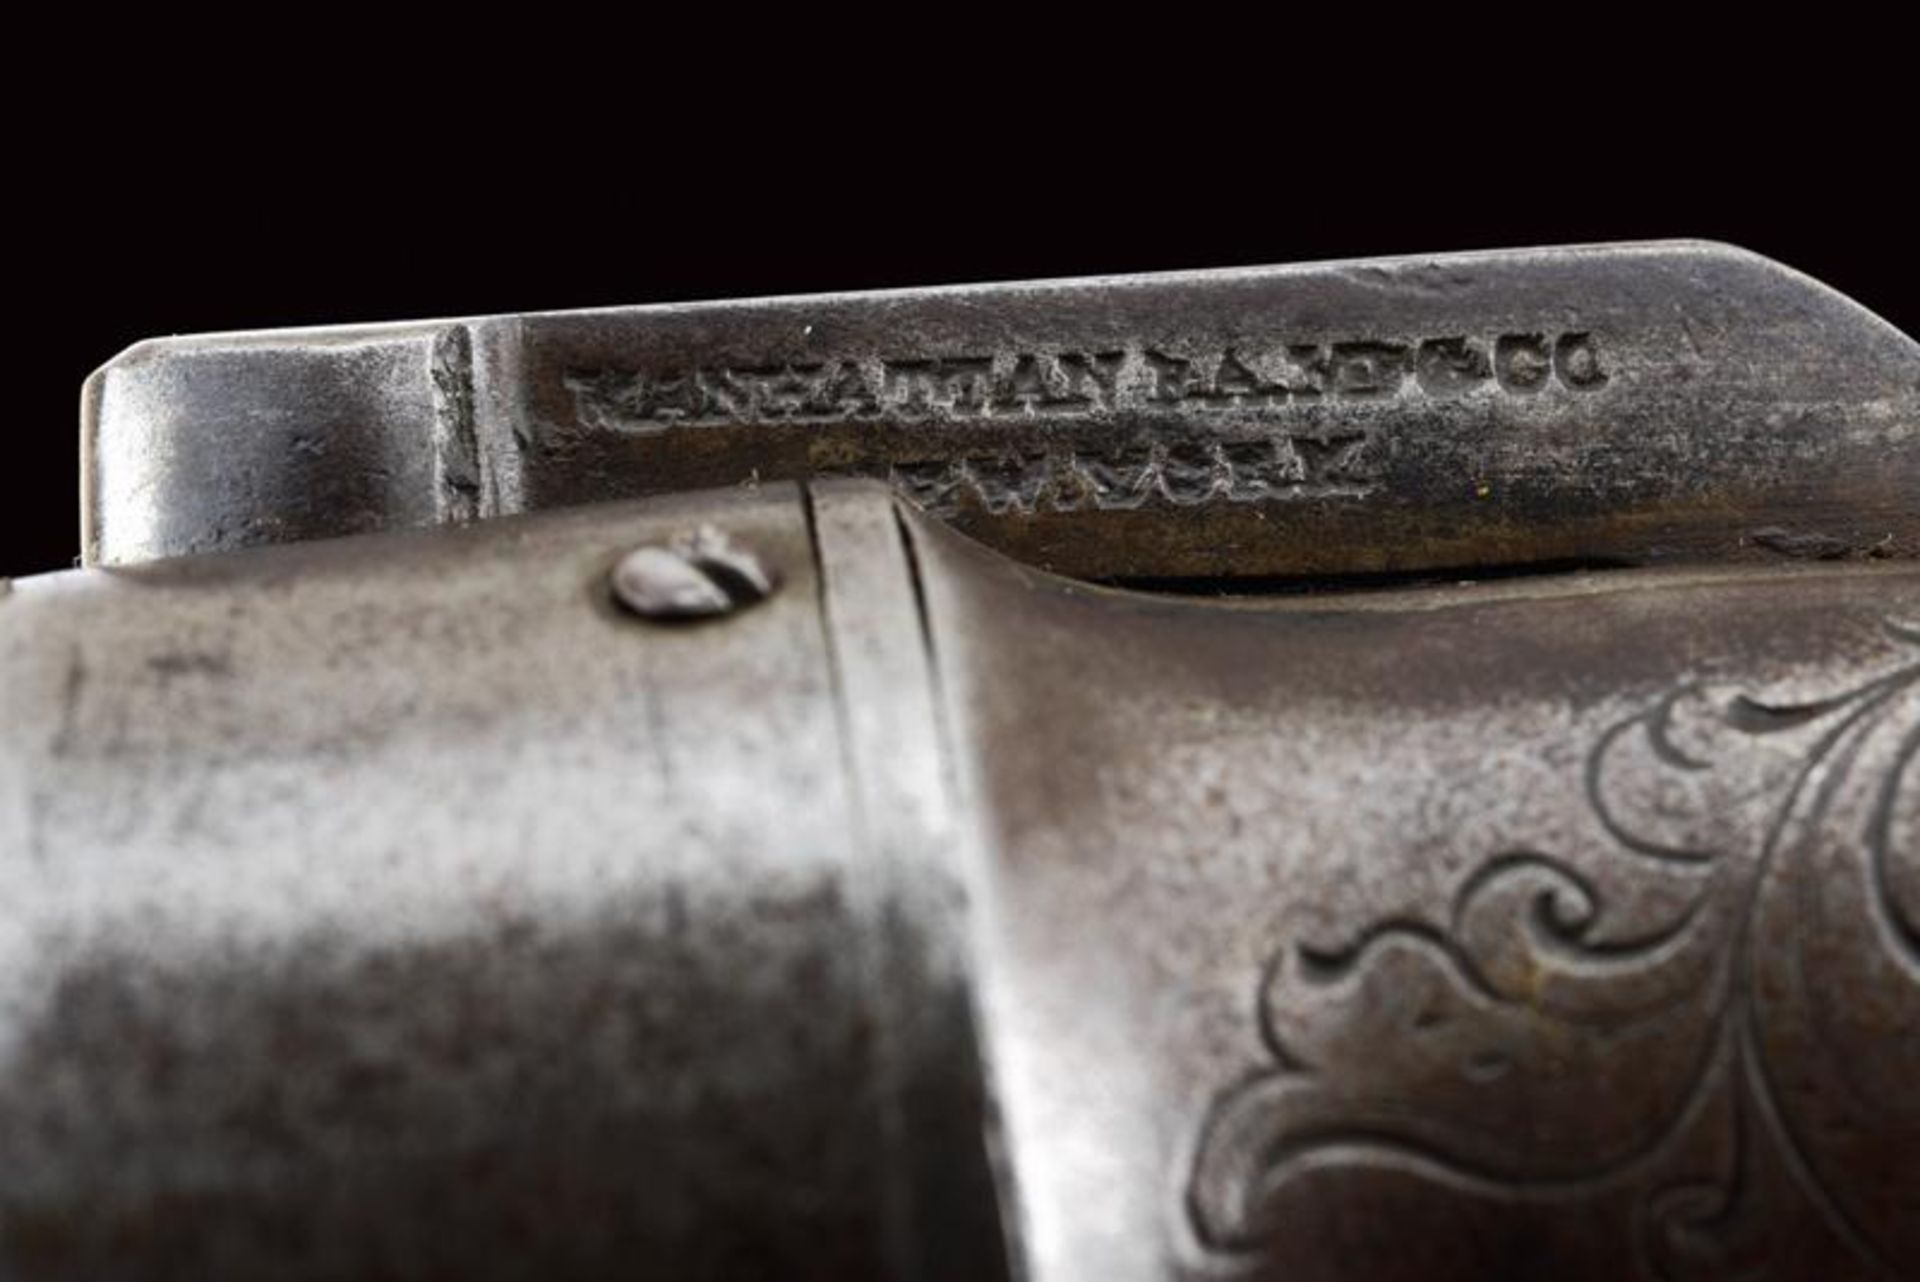 A percussion pepperbox revolver by Manhattan F. A. MFG.CO. - Image 4 of 5